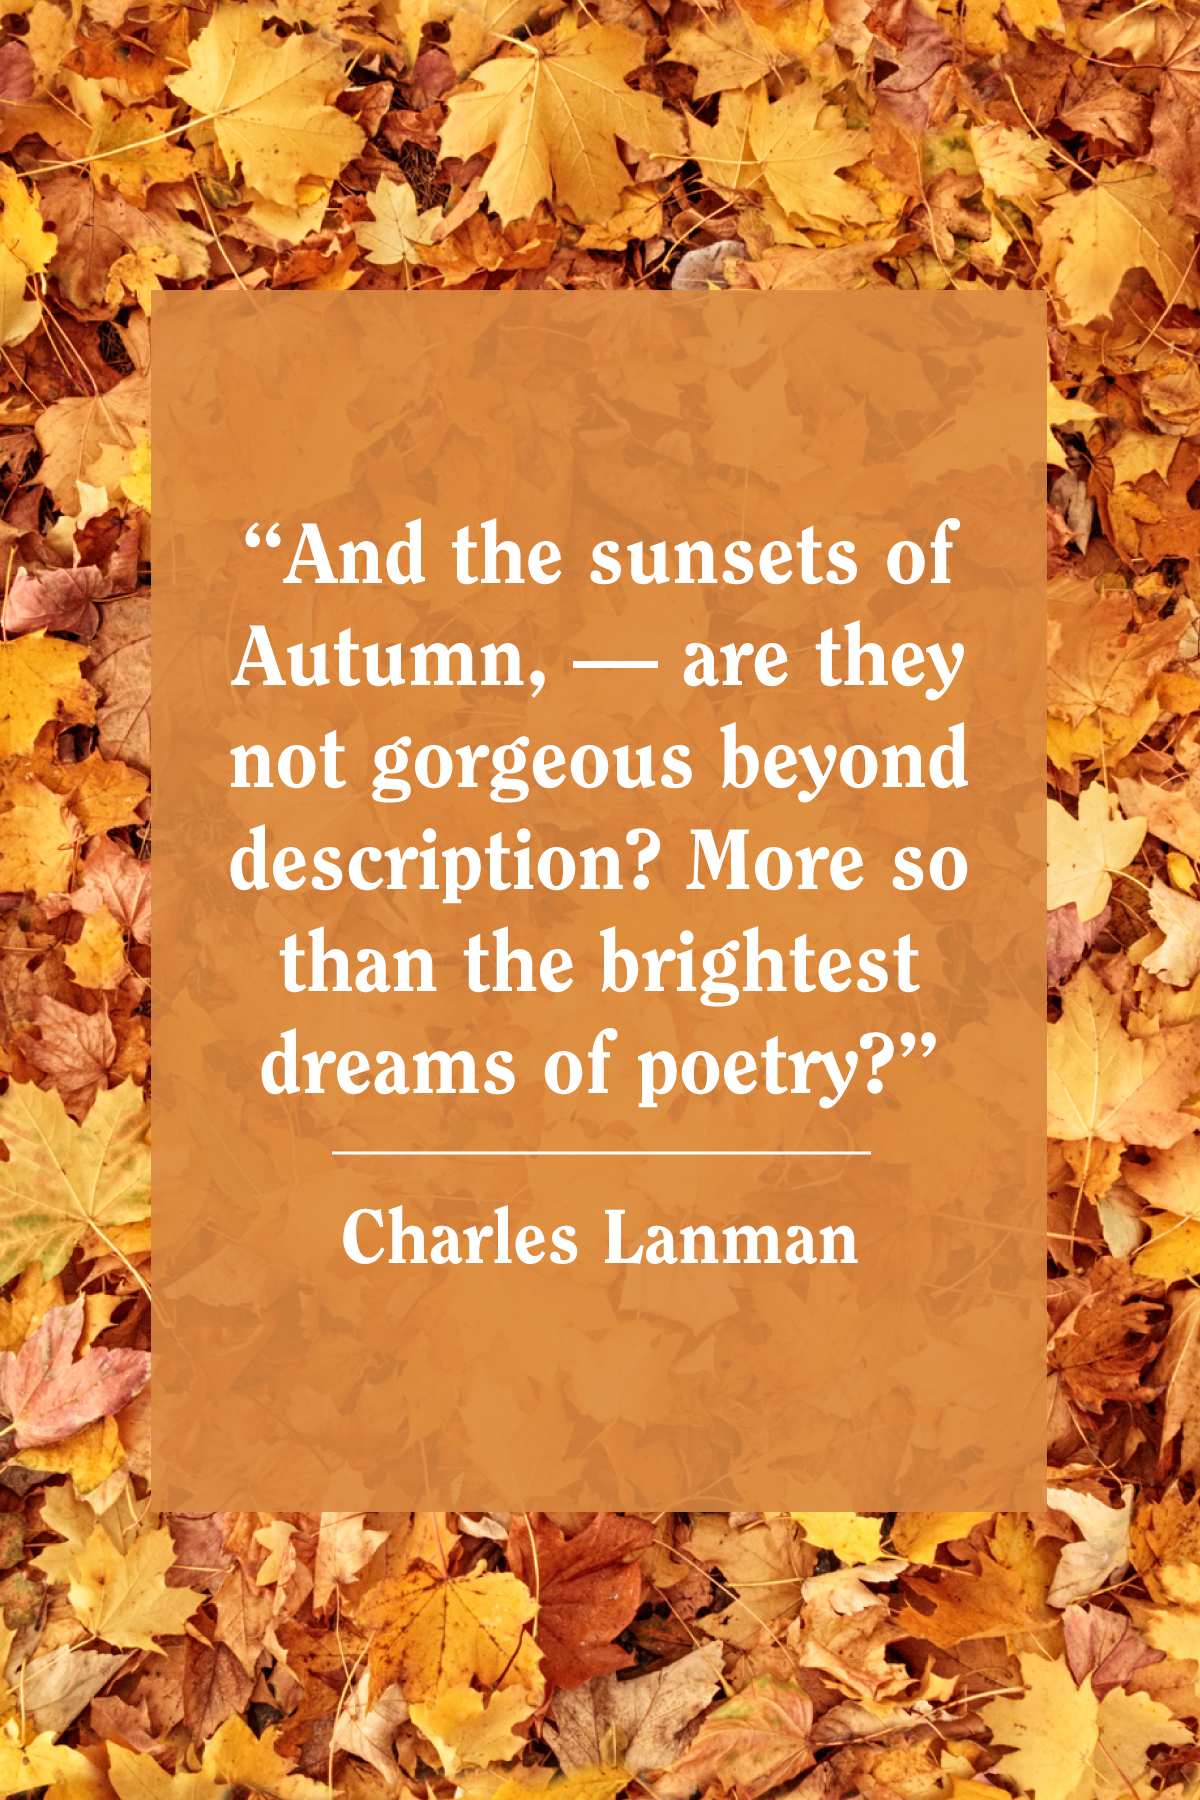 Best Fall Quotes 2020 Autumn Quotes for Instagram